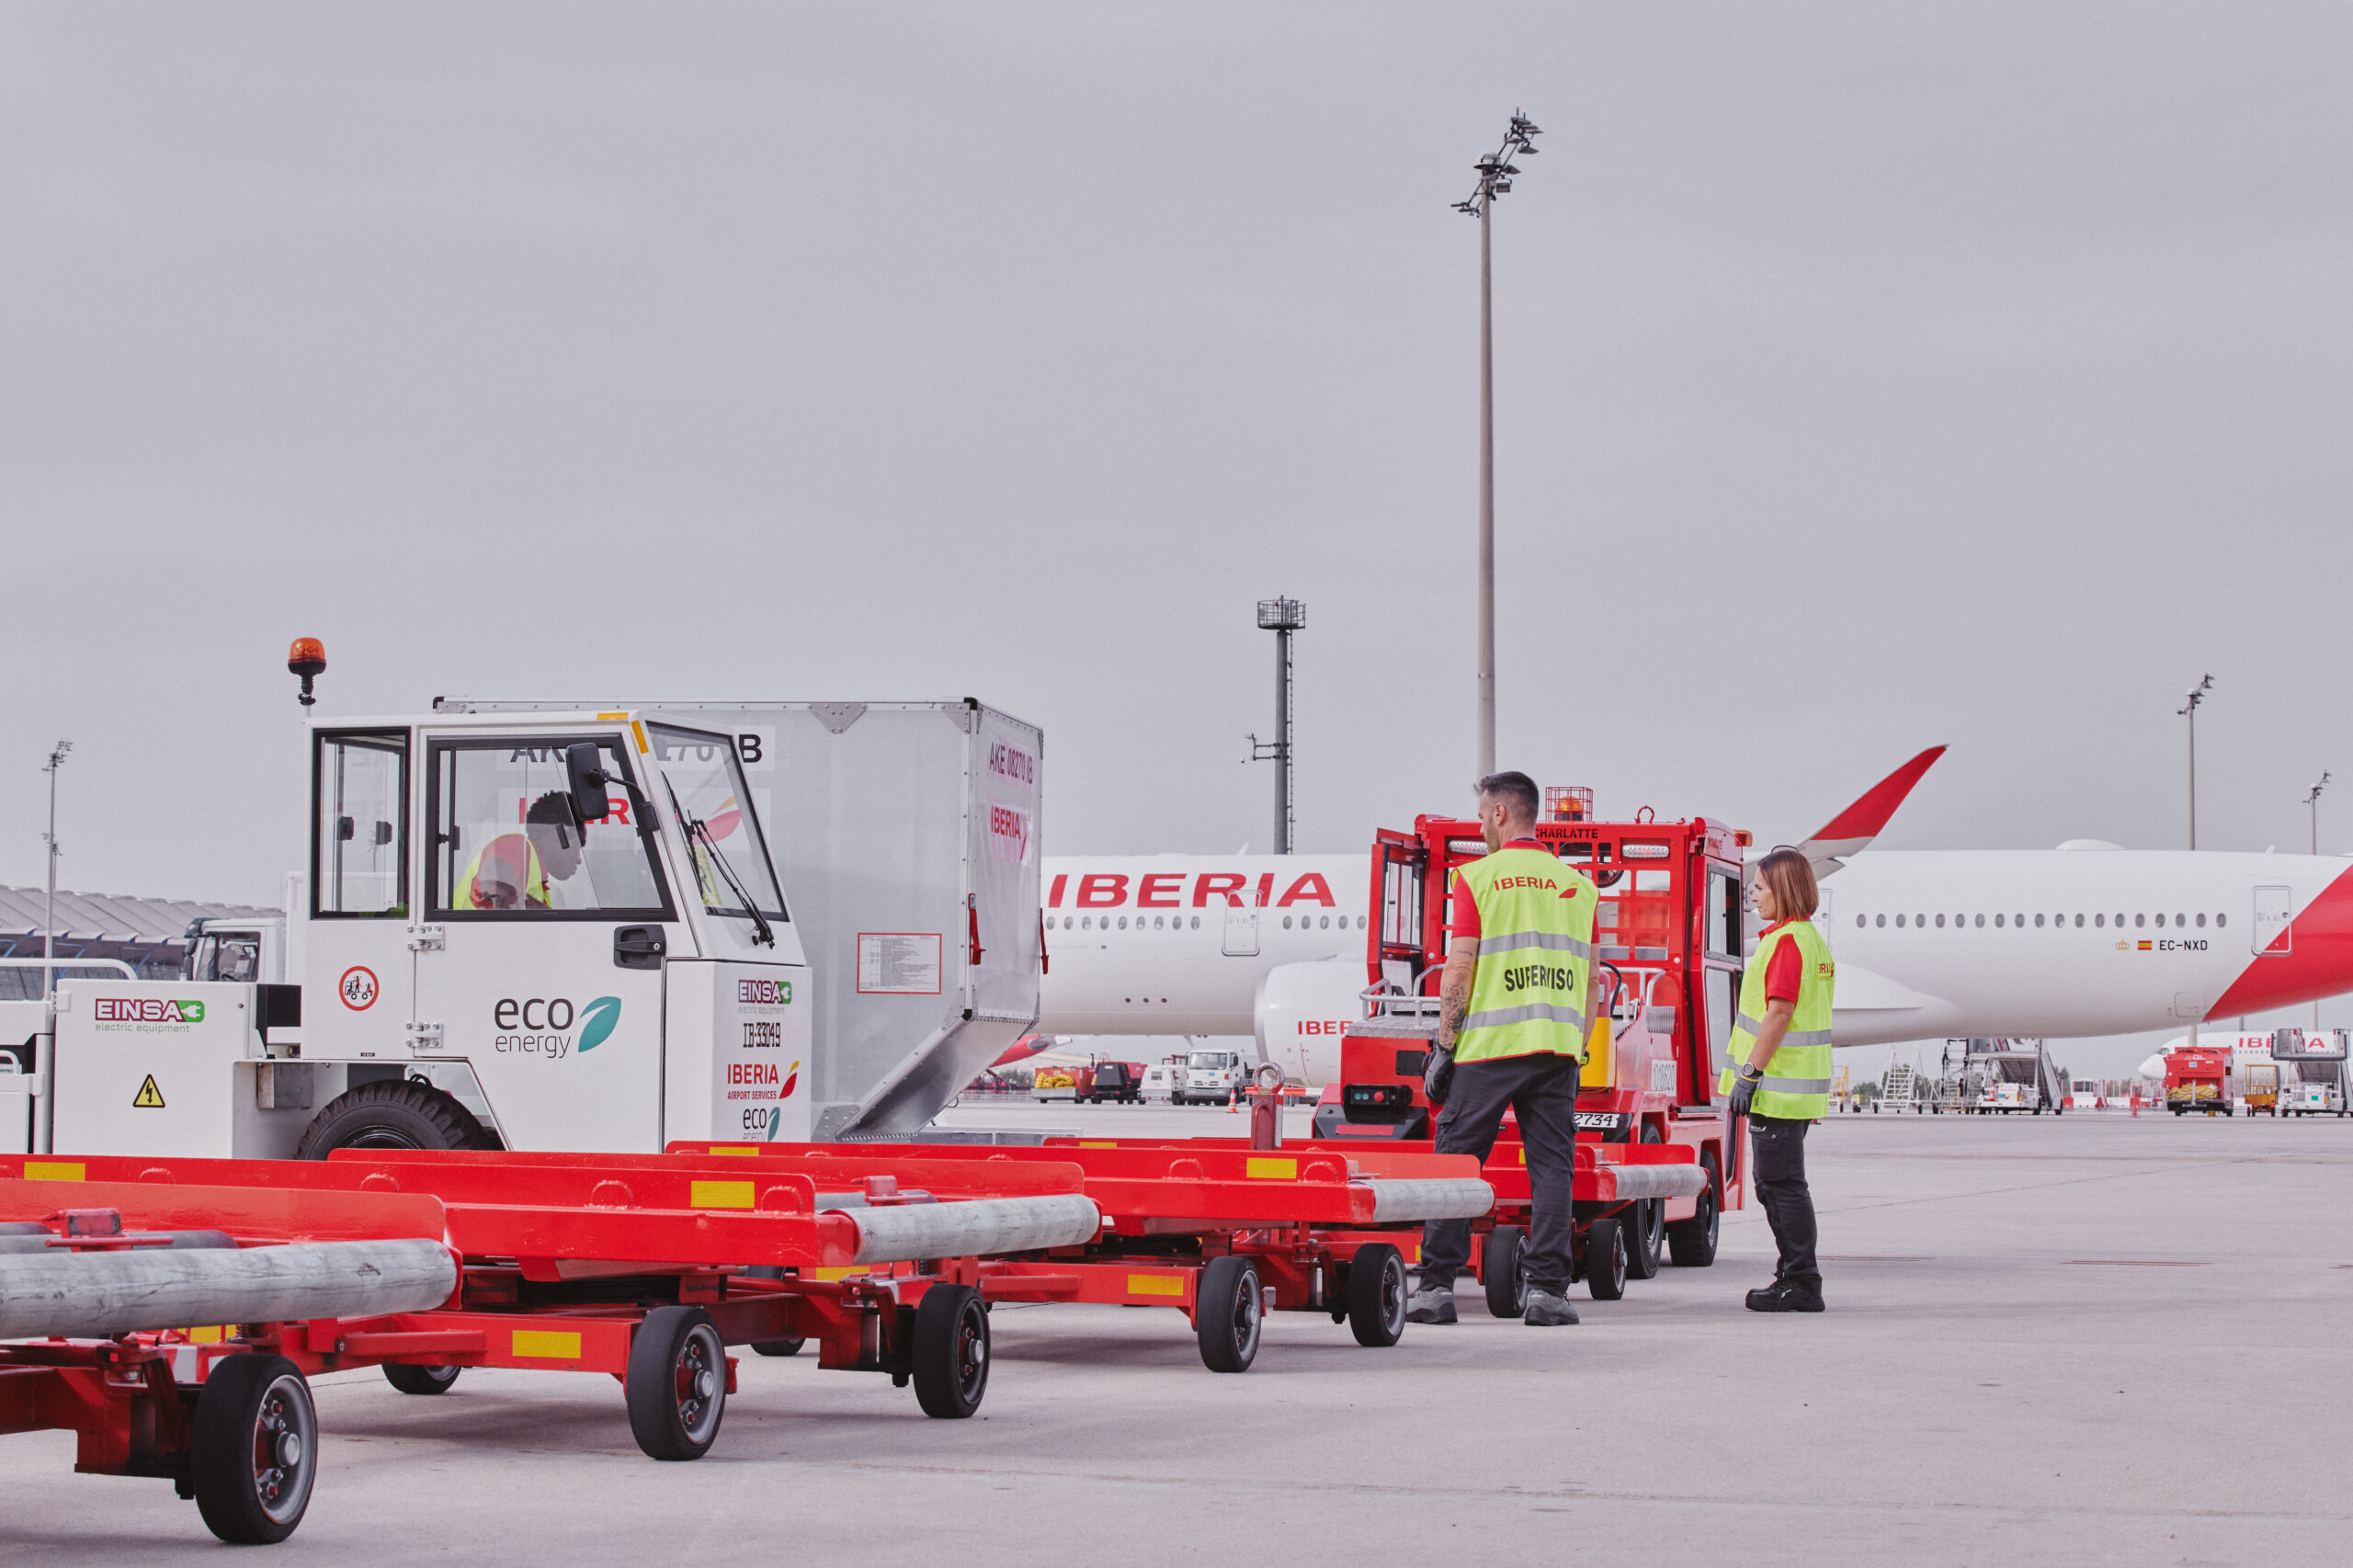 Iberia Airport Services will serve more than 88 million passengers in 2022, 88 per cent more than in 2021.